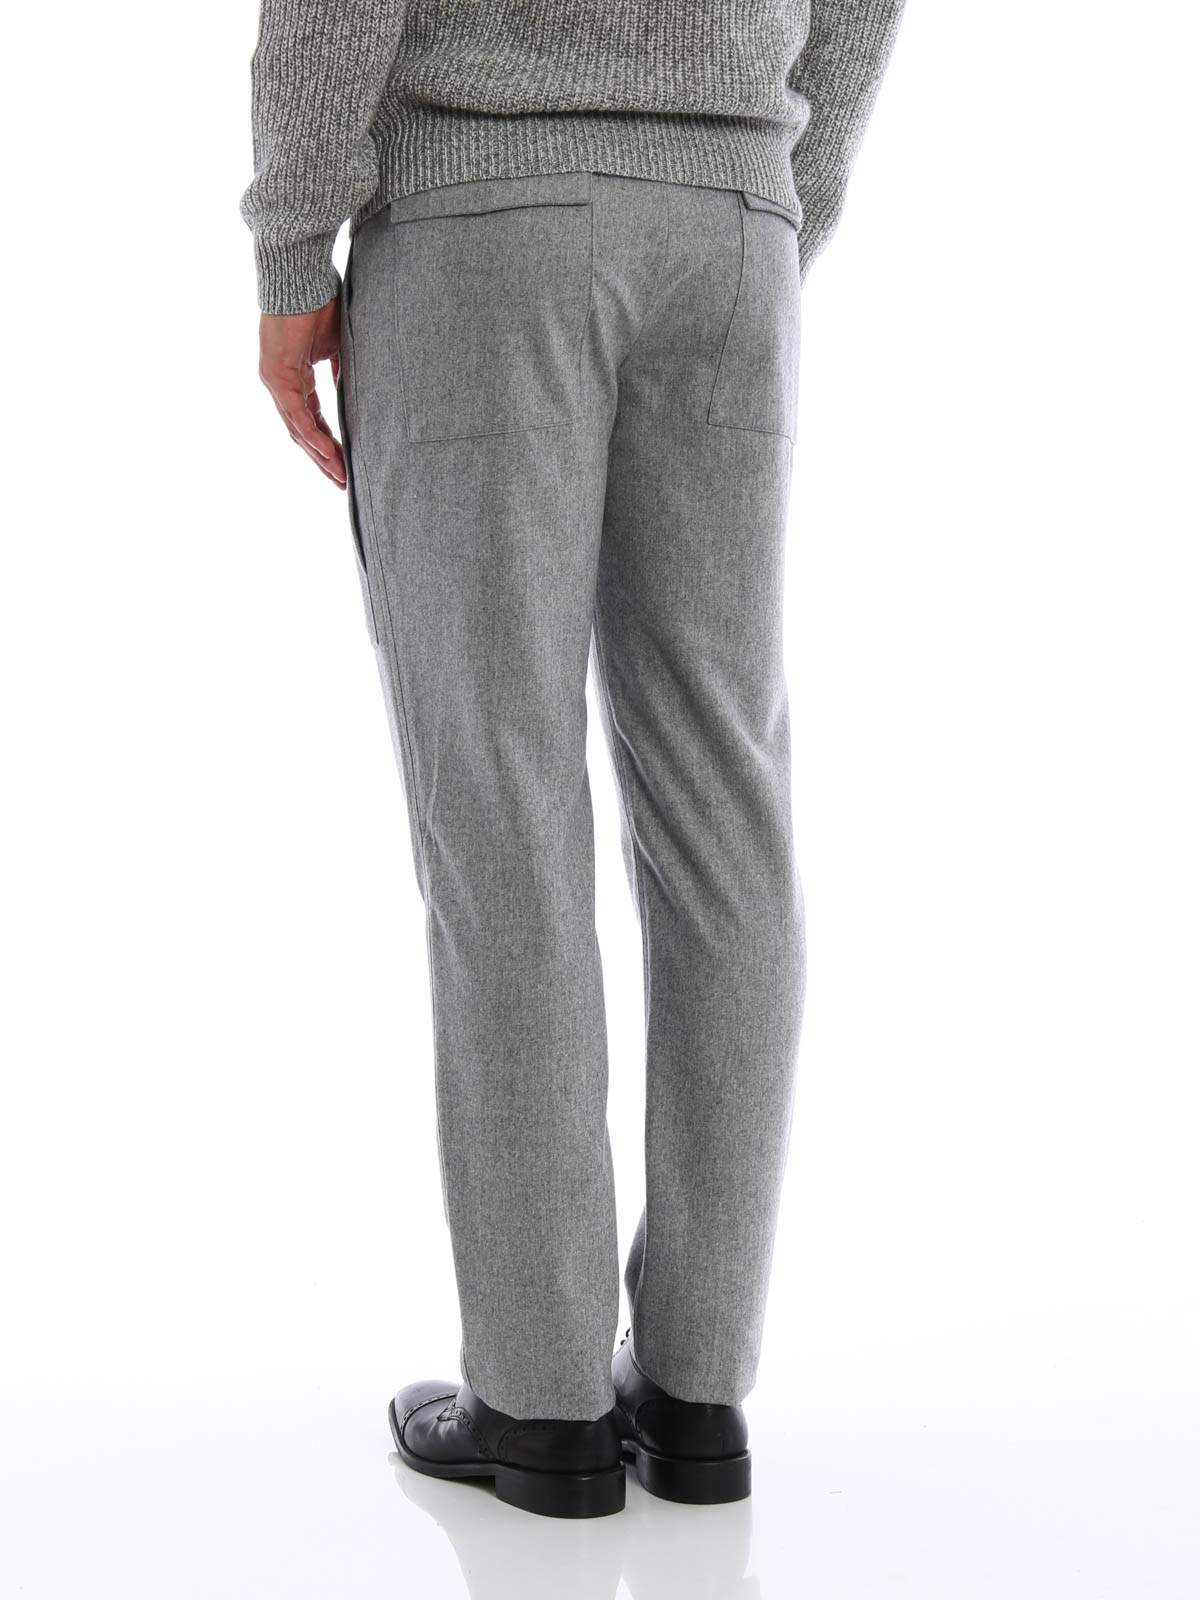 Flannel Trousers in Light Grey  Cad  The Dandy